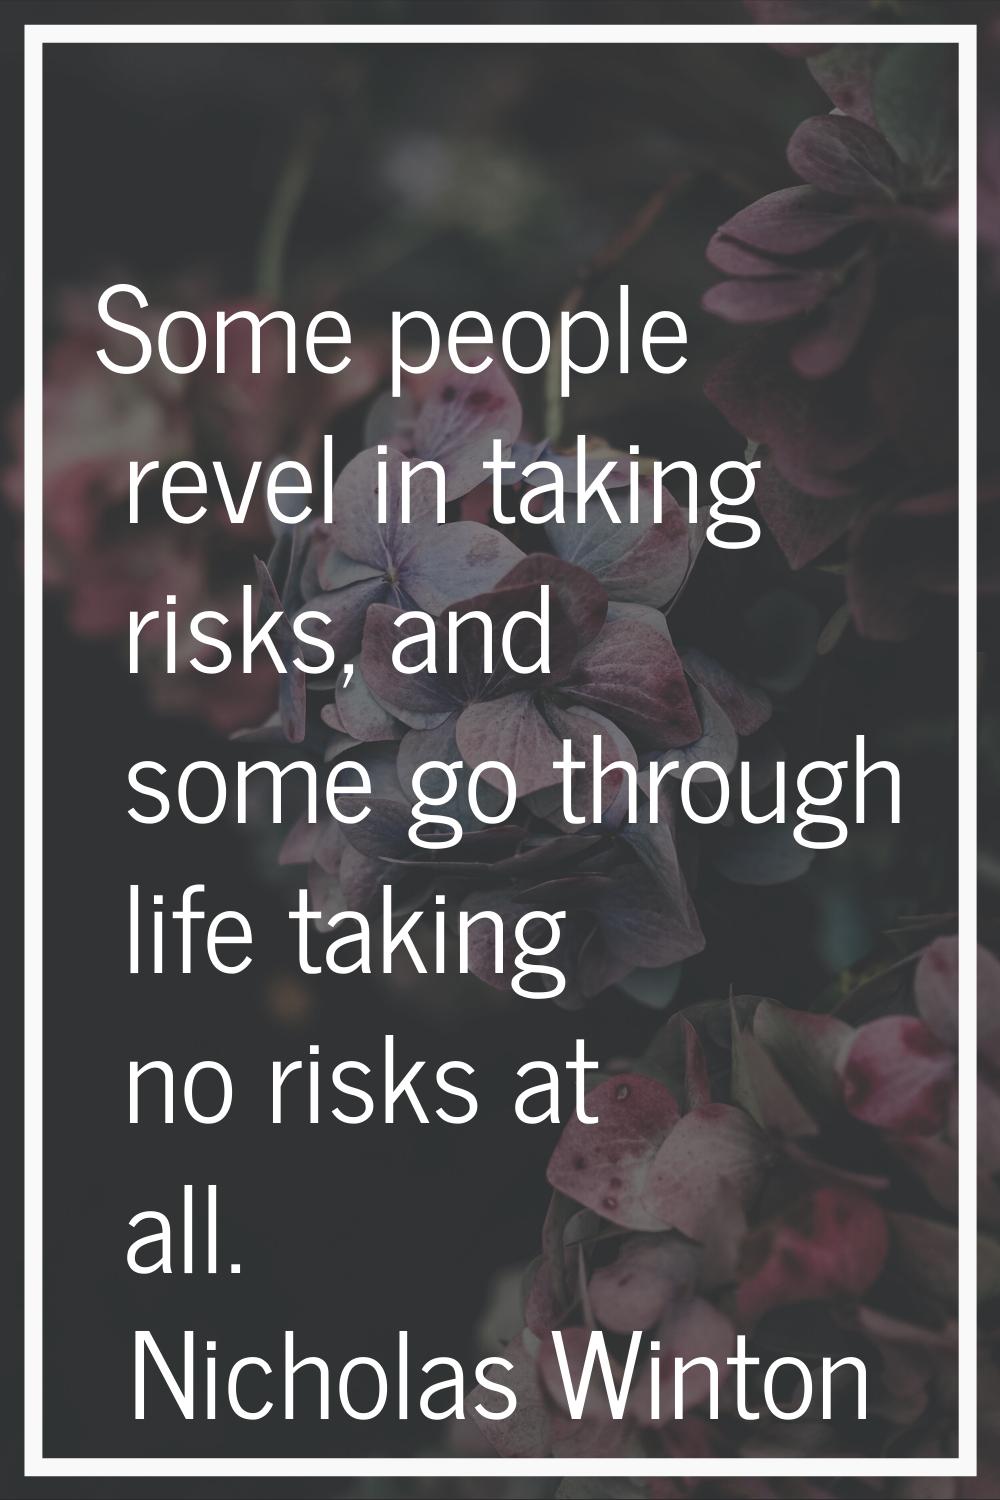 Some people revel in taking risks, and some go through life taking no risks at all.